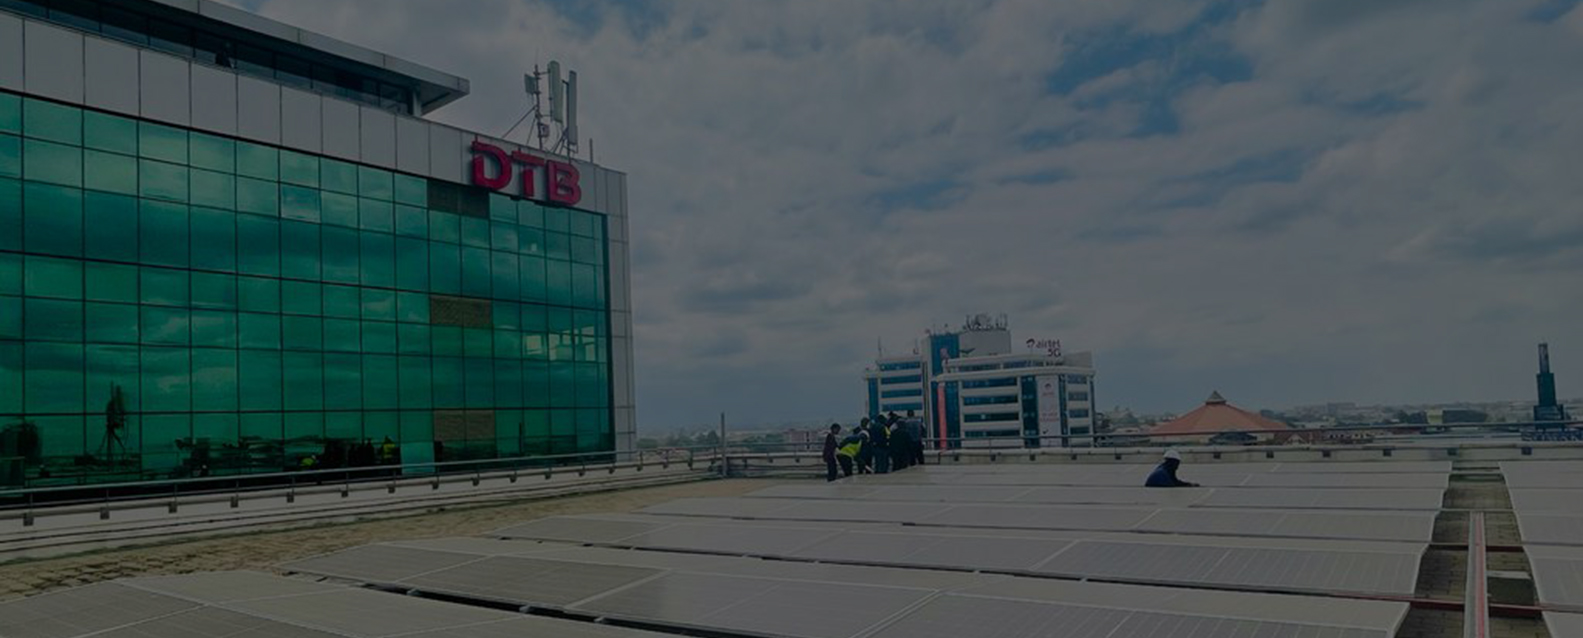 DTB Installs Solar Panels at their Head Office